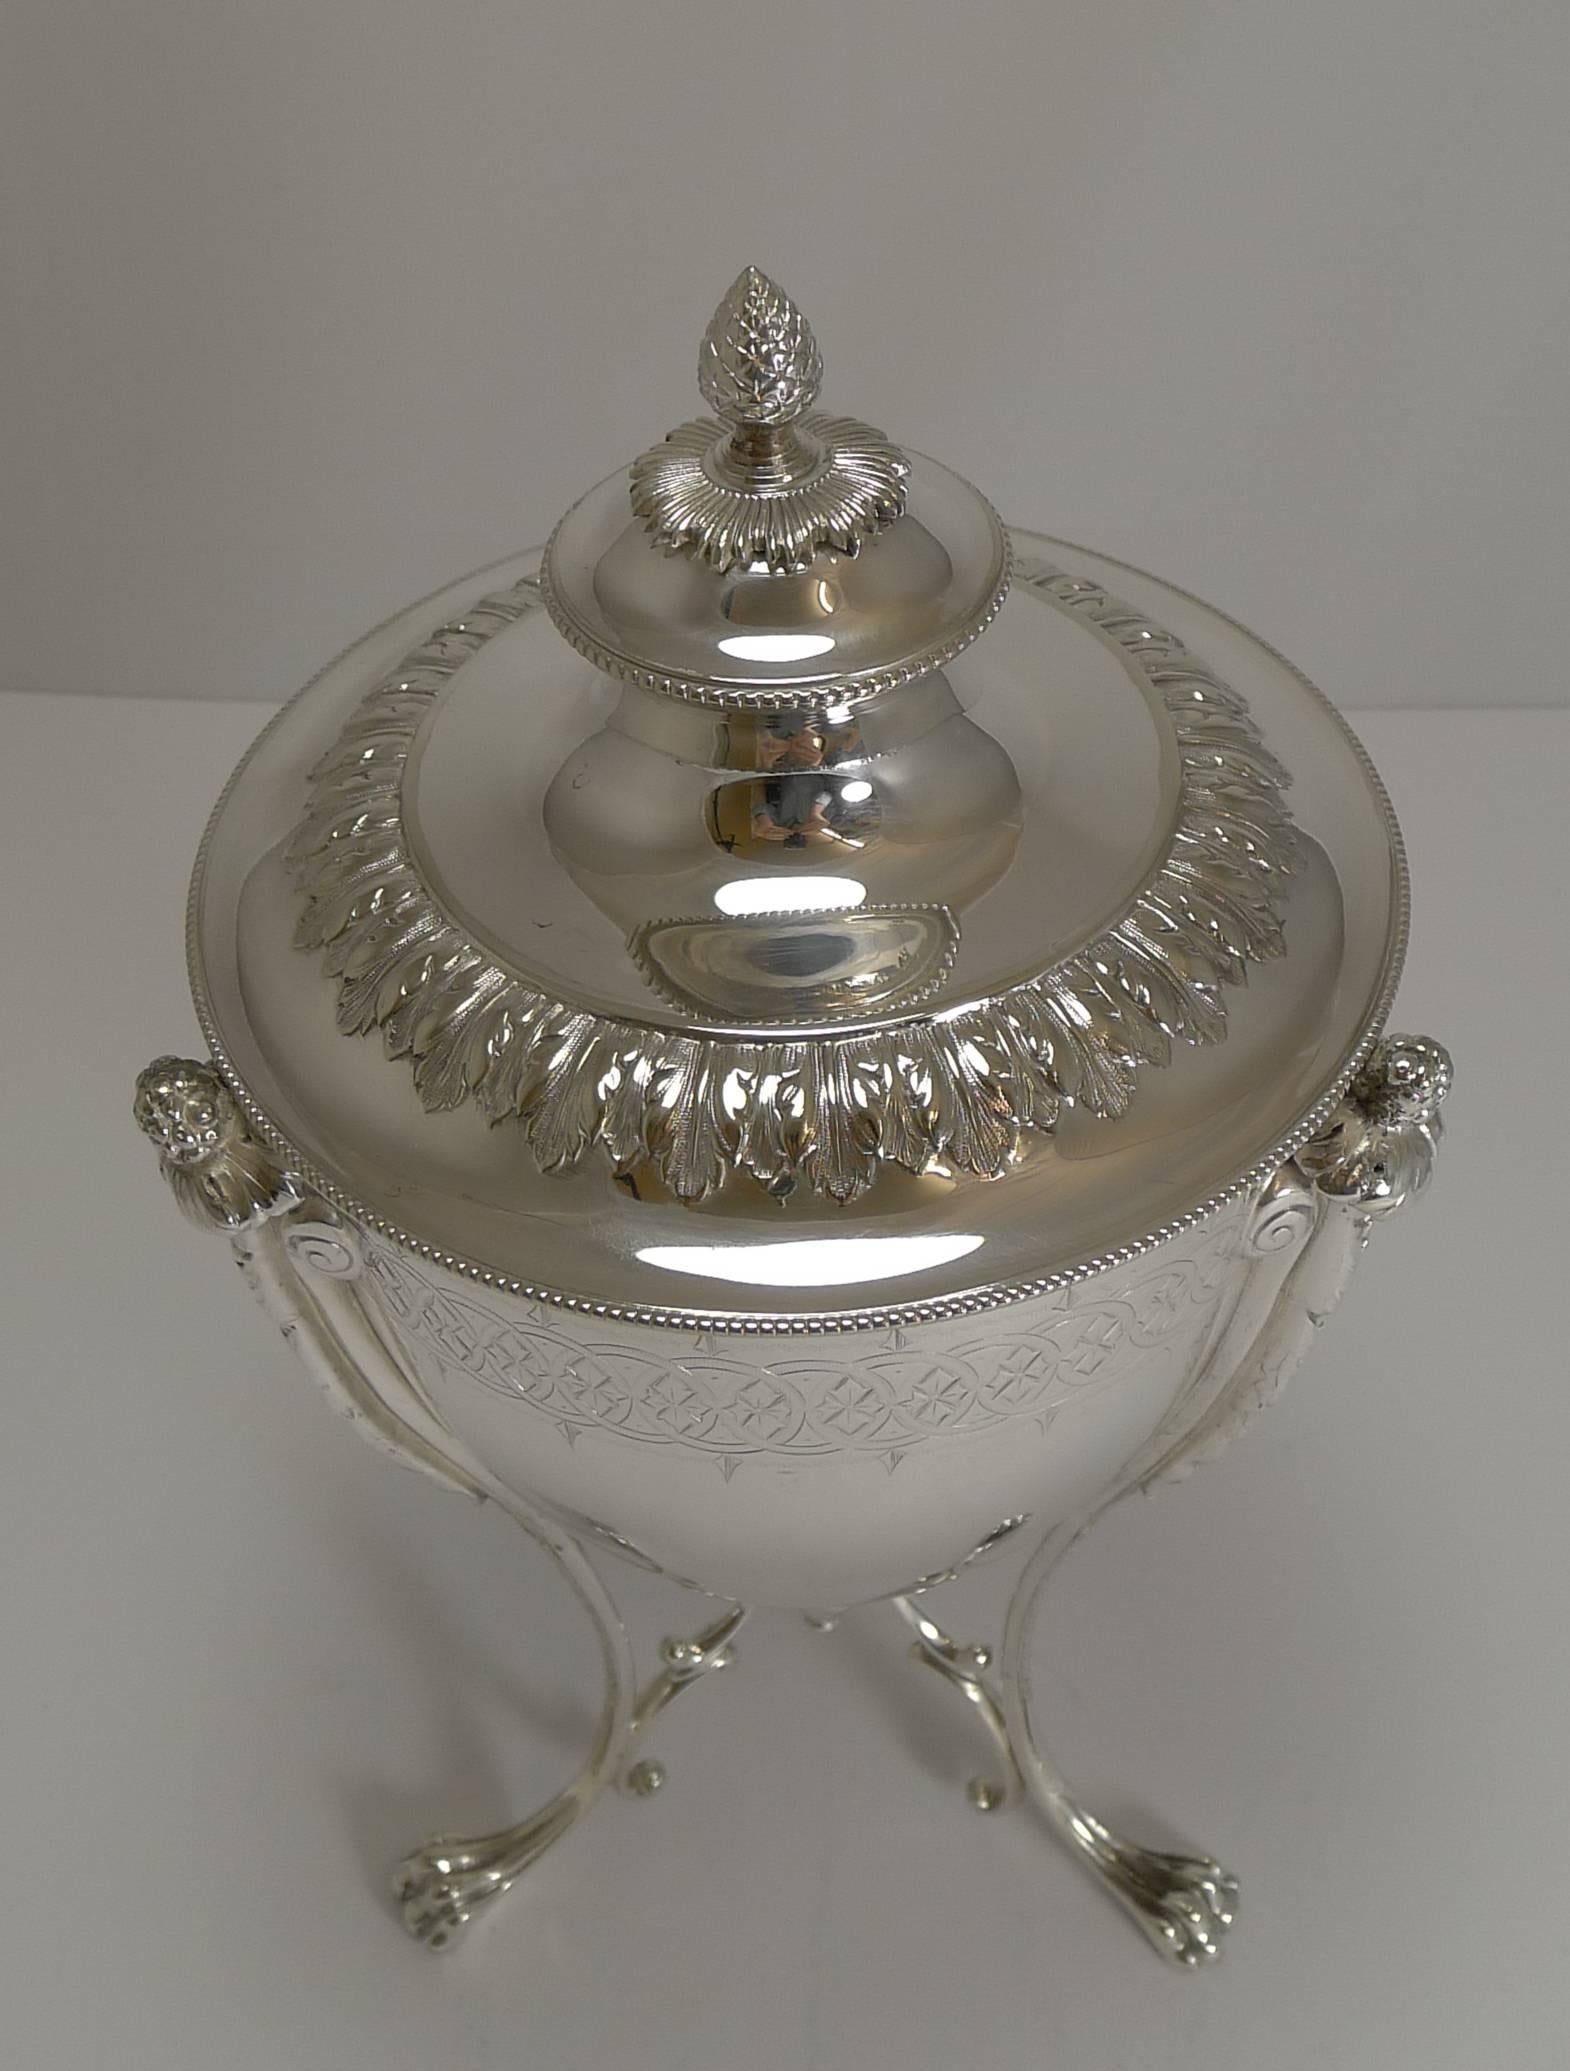 Plated Grand Antique English Silver Plate Biscuit Box by Martin Hall & Co., circa 1860